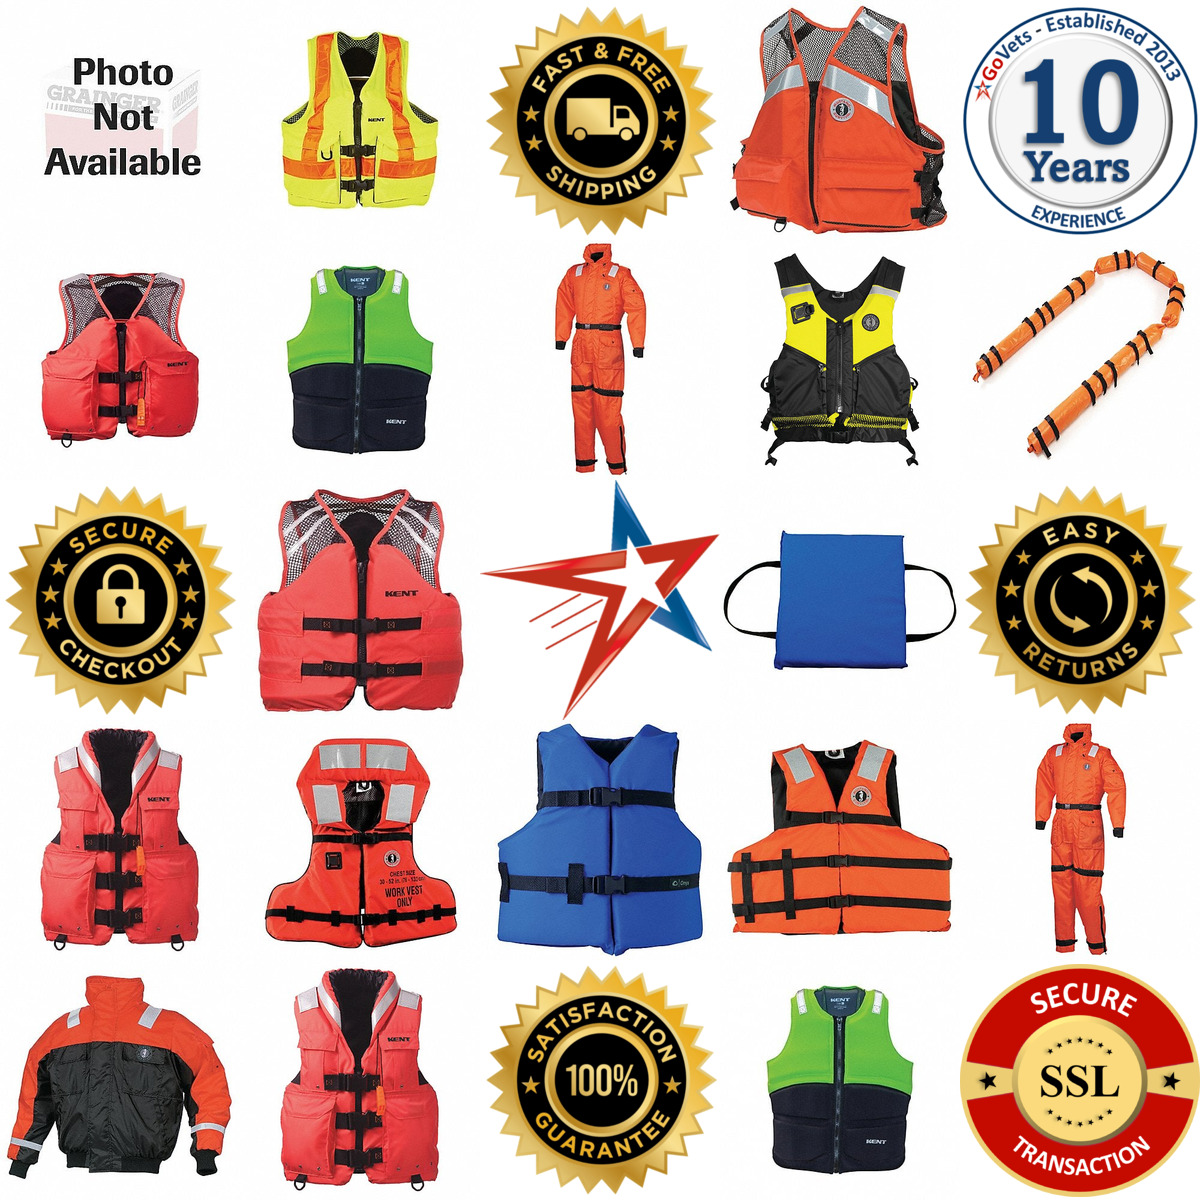 A selection of Water Safety products on GoVets